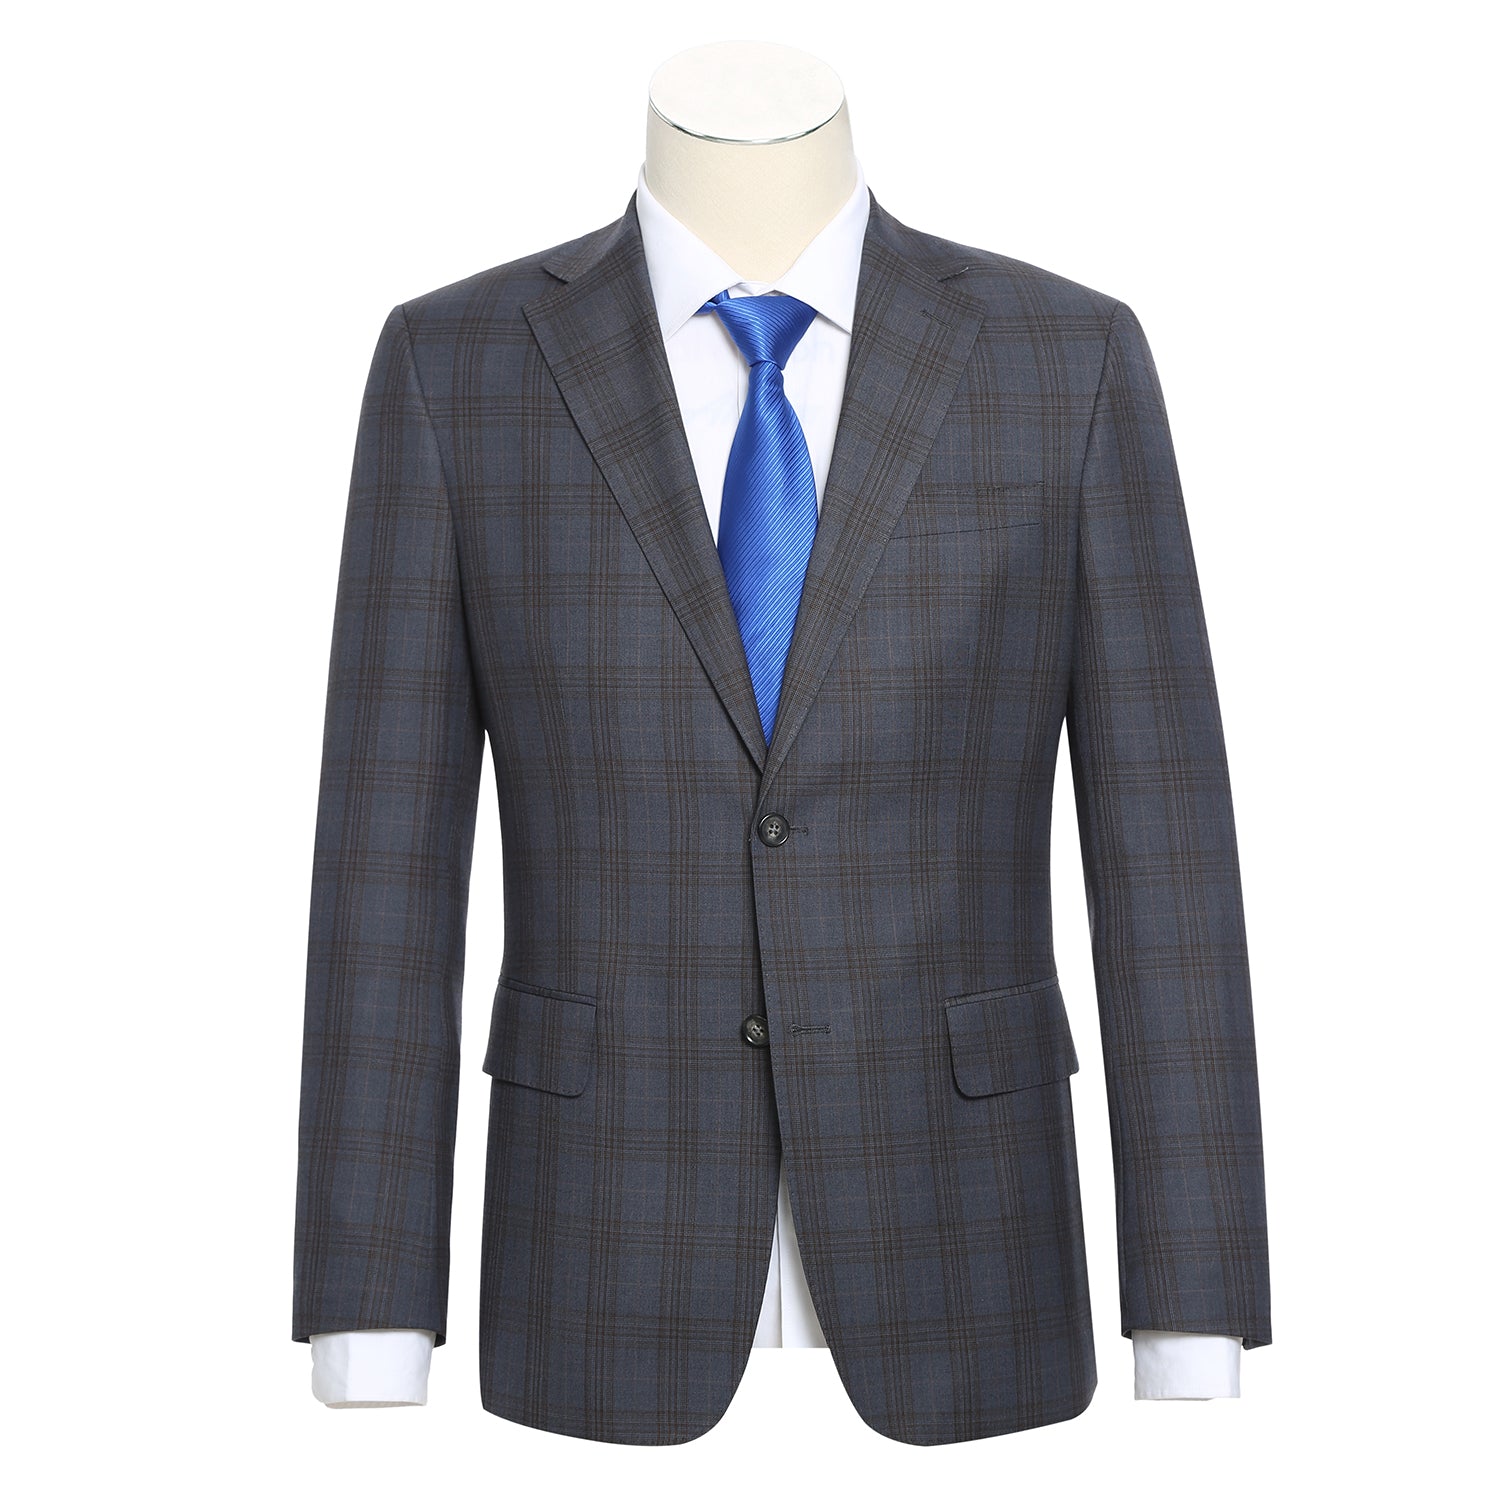 English Laundry Gray with Tan Check Notch Suit 1